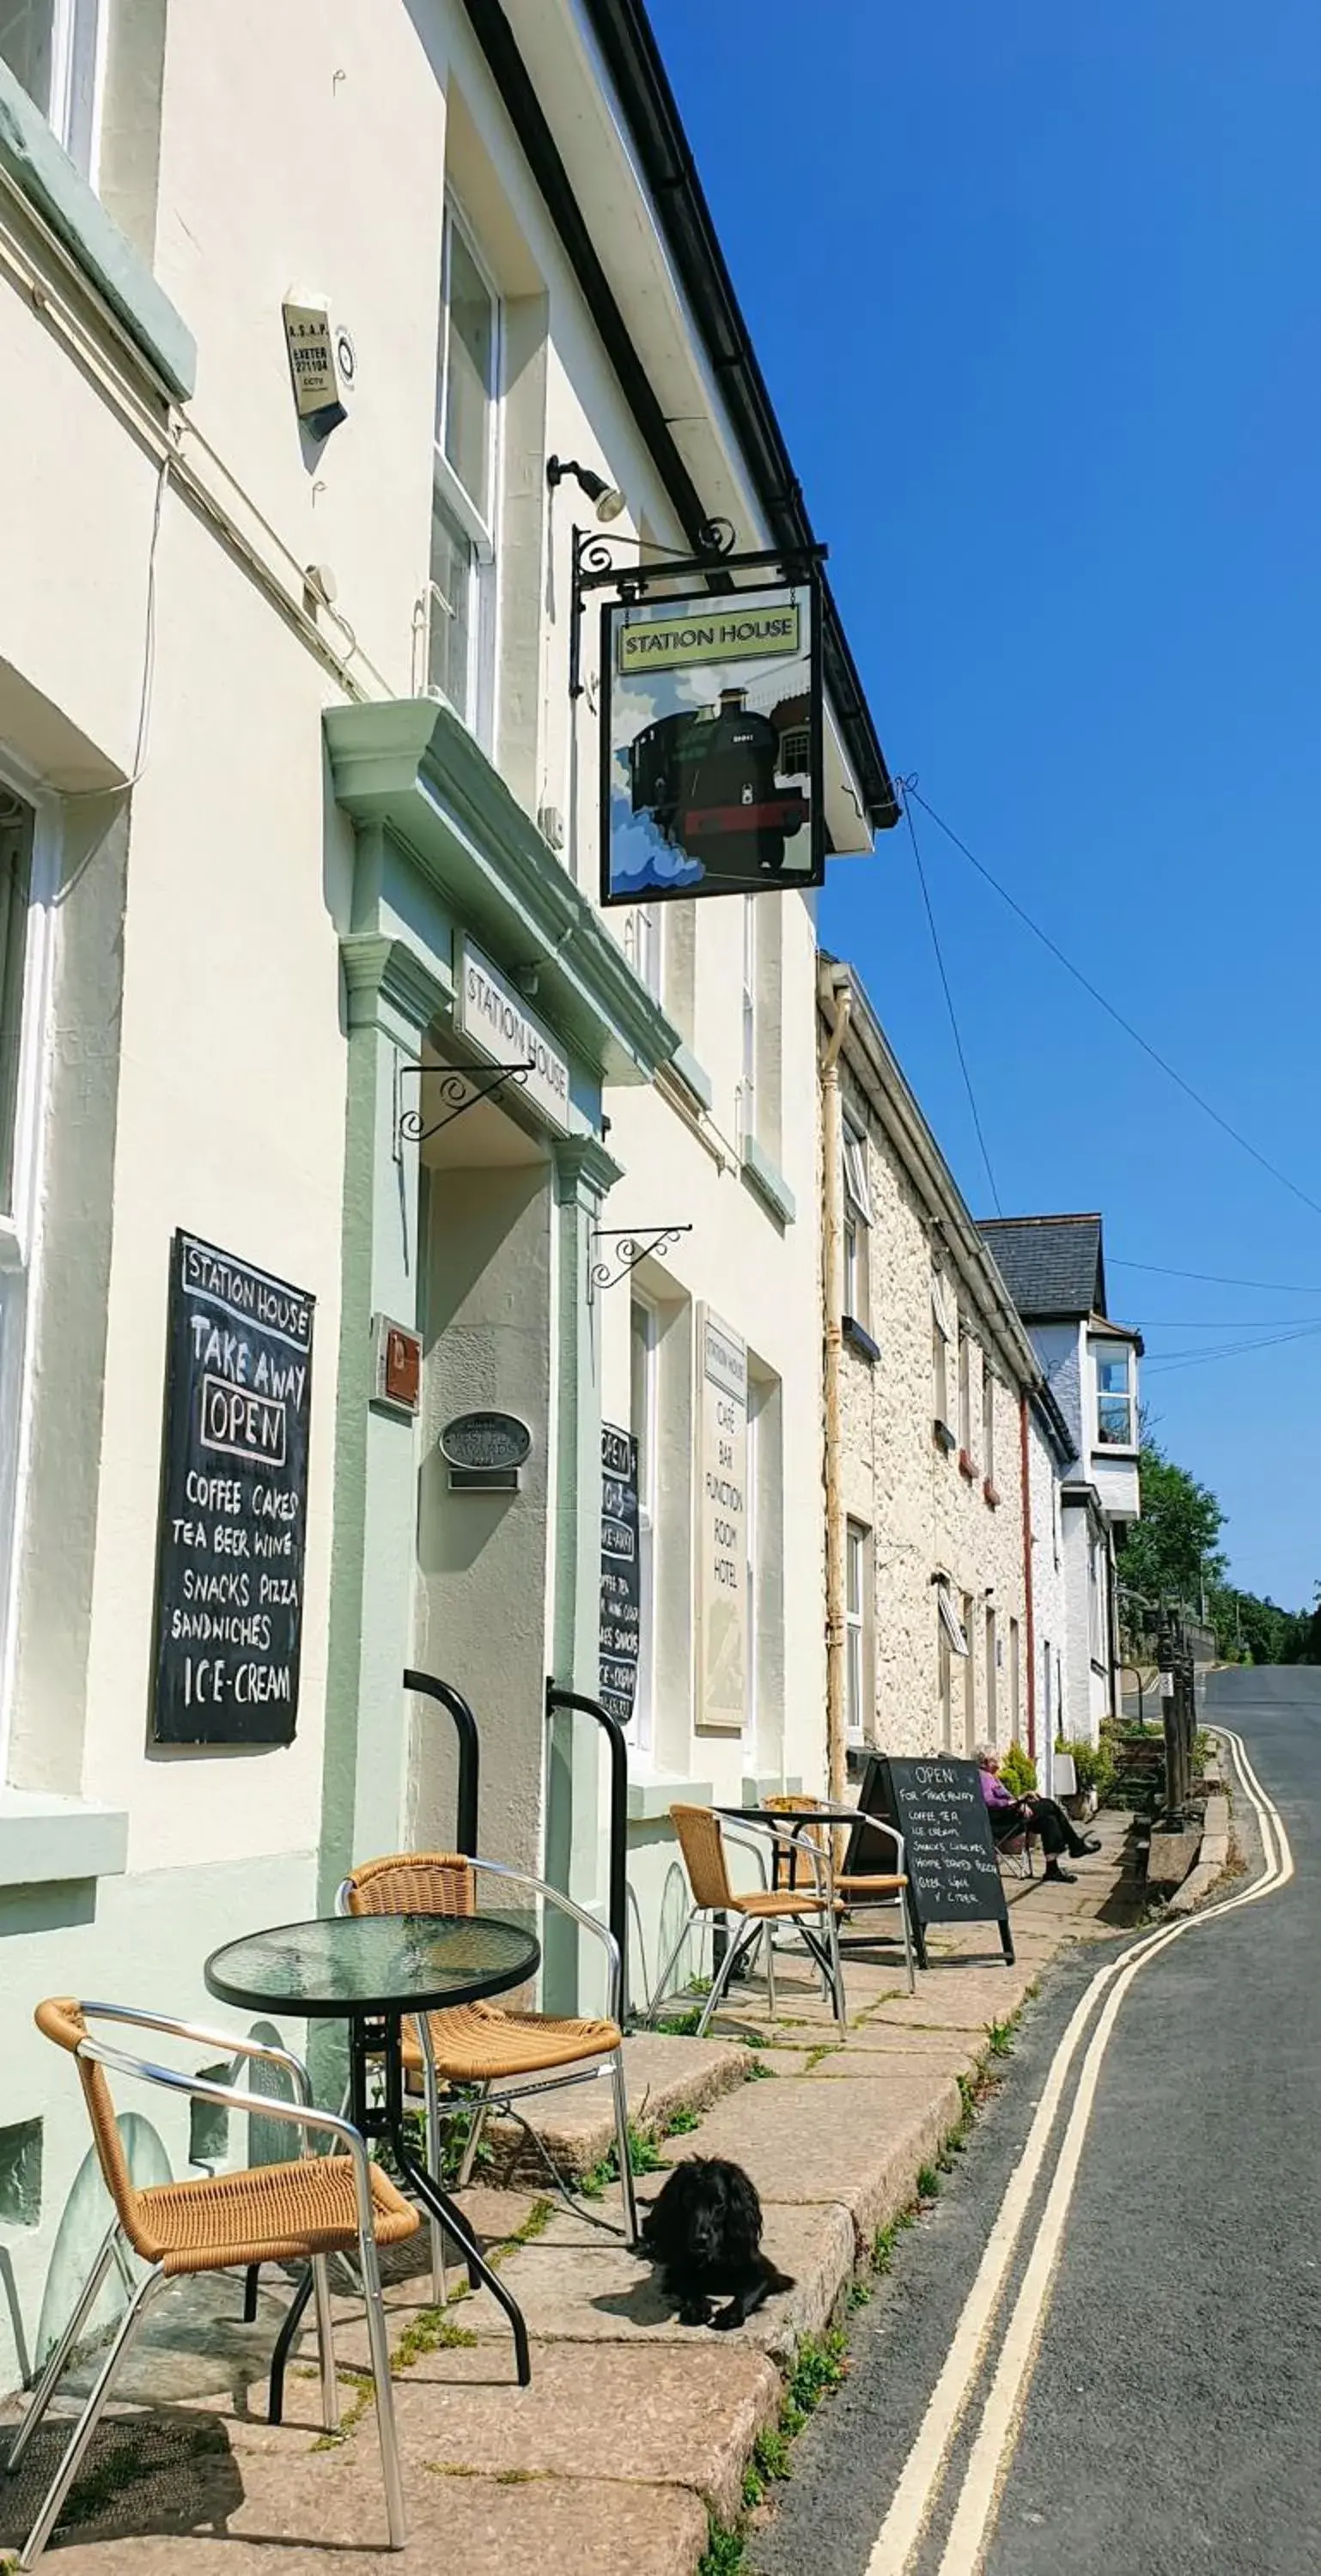 Property Building in Station House, Dartmoor and Coast located, Village centre Hotel